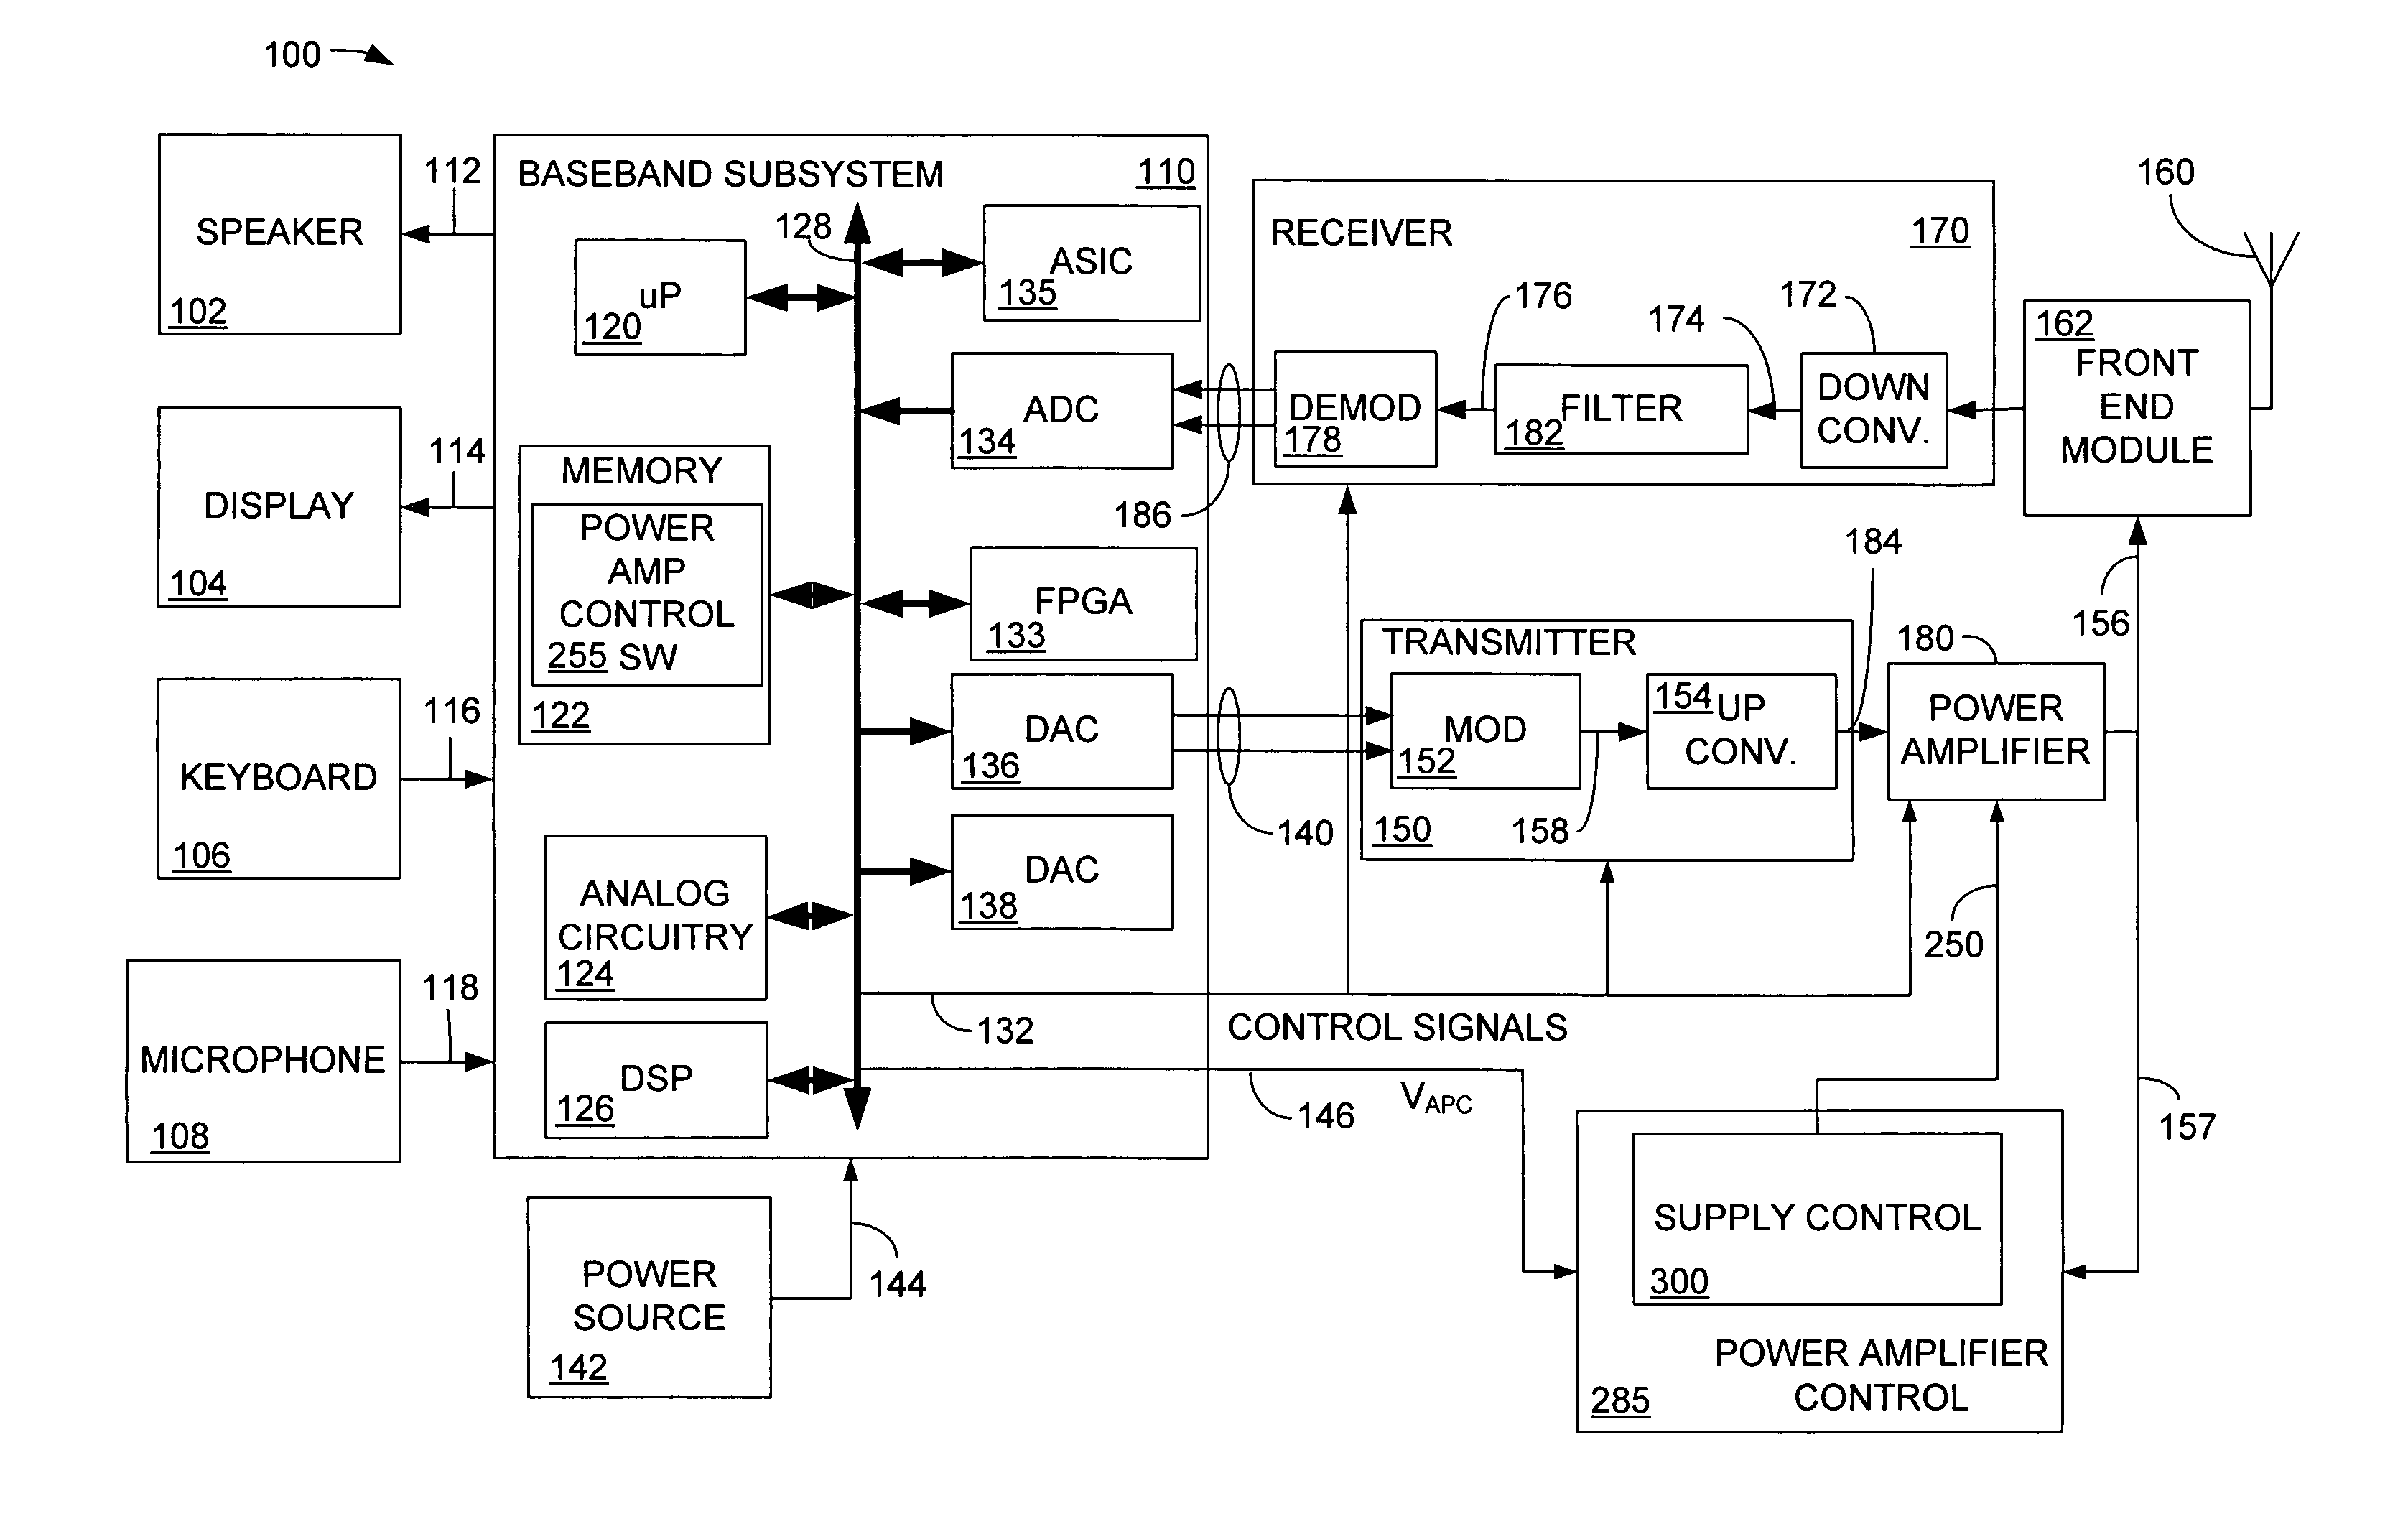 Dual voltage regulator for a supply voltage controlled power amplifier in a closed power control loop